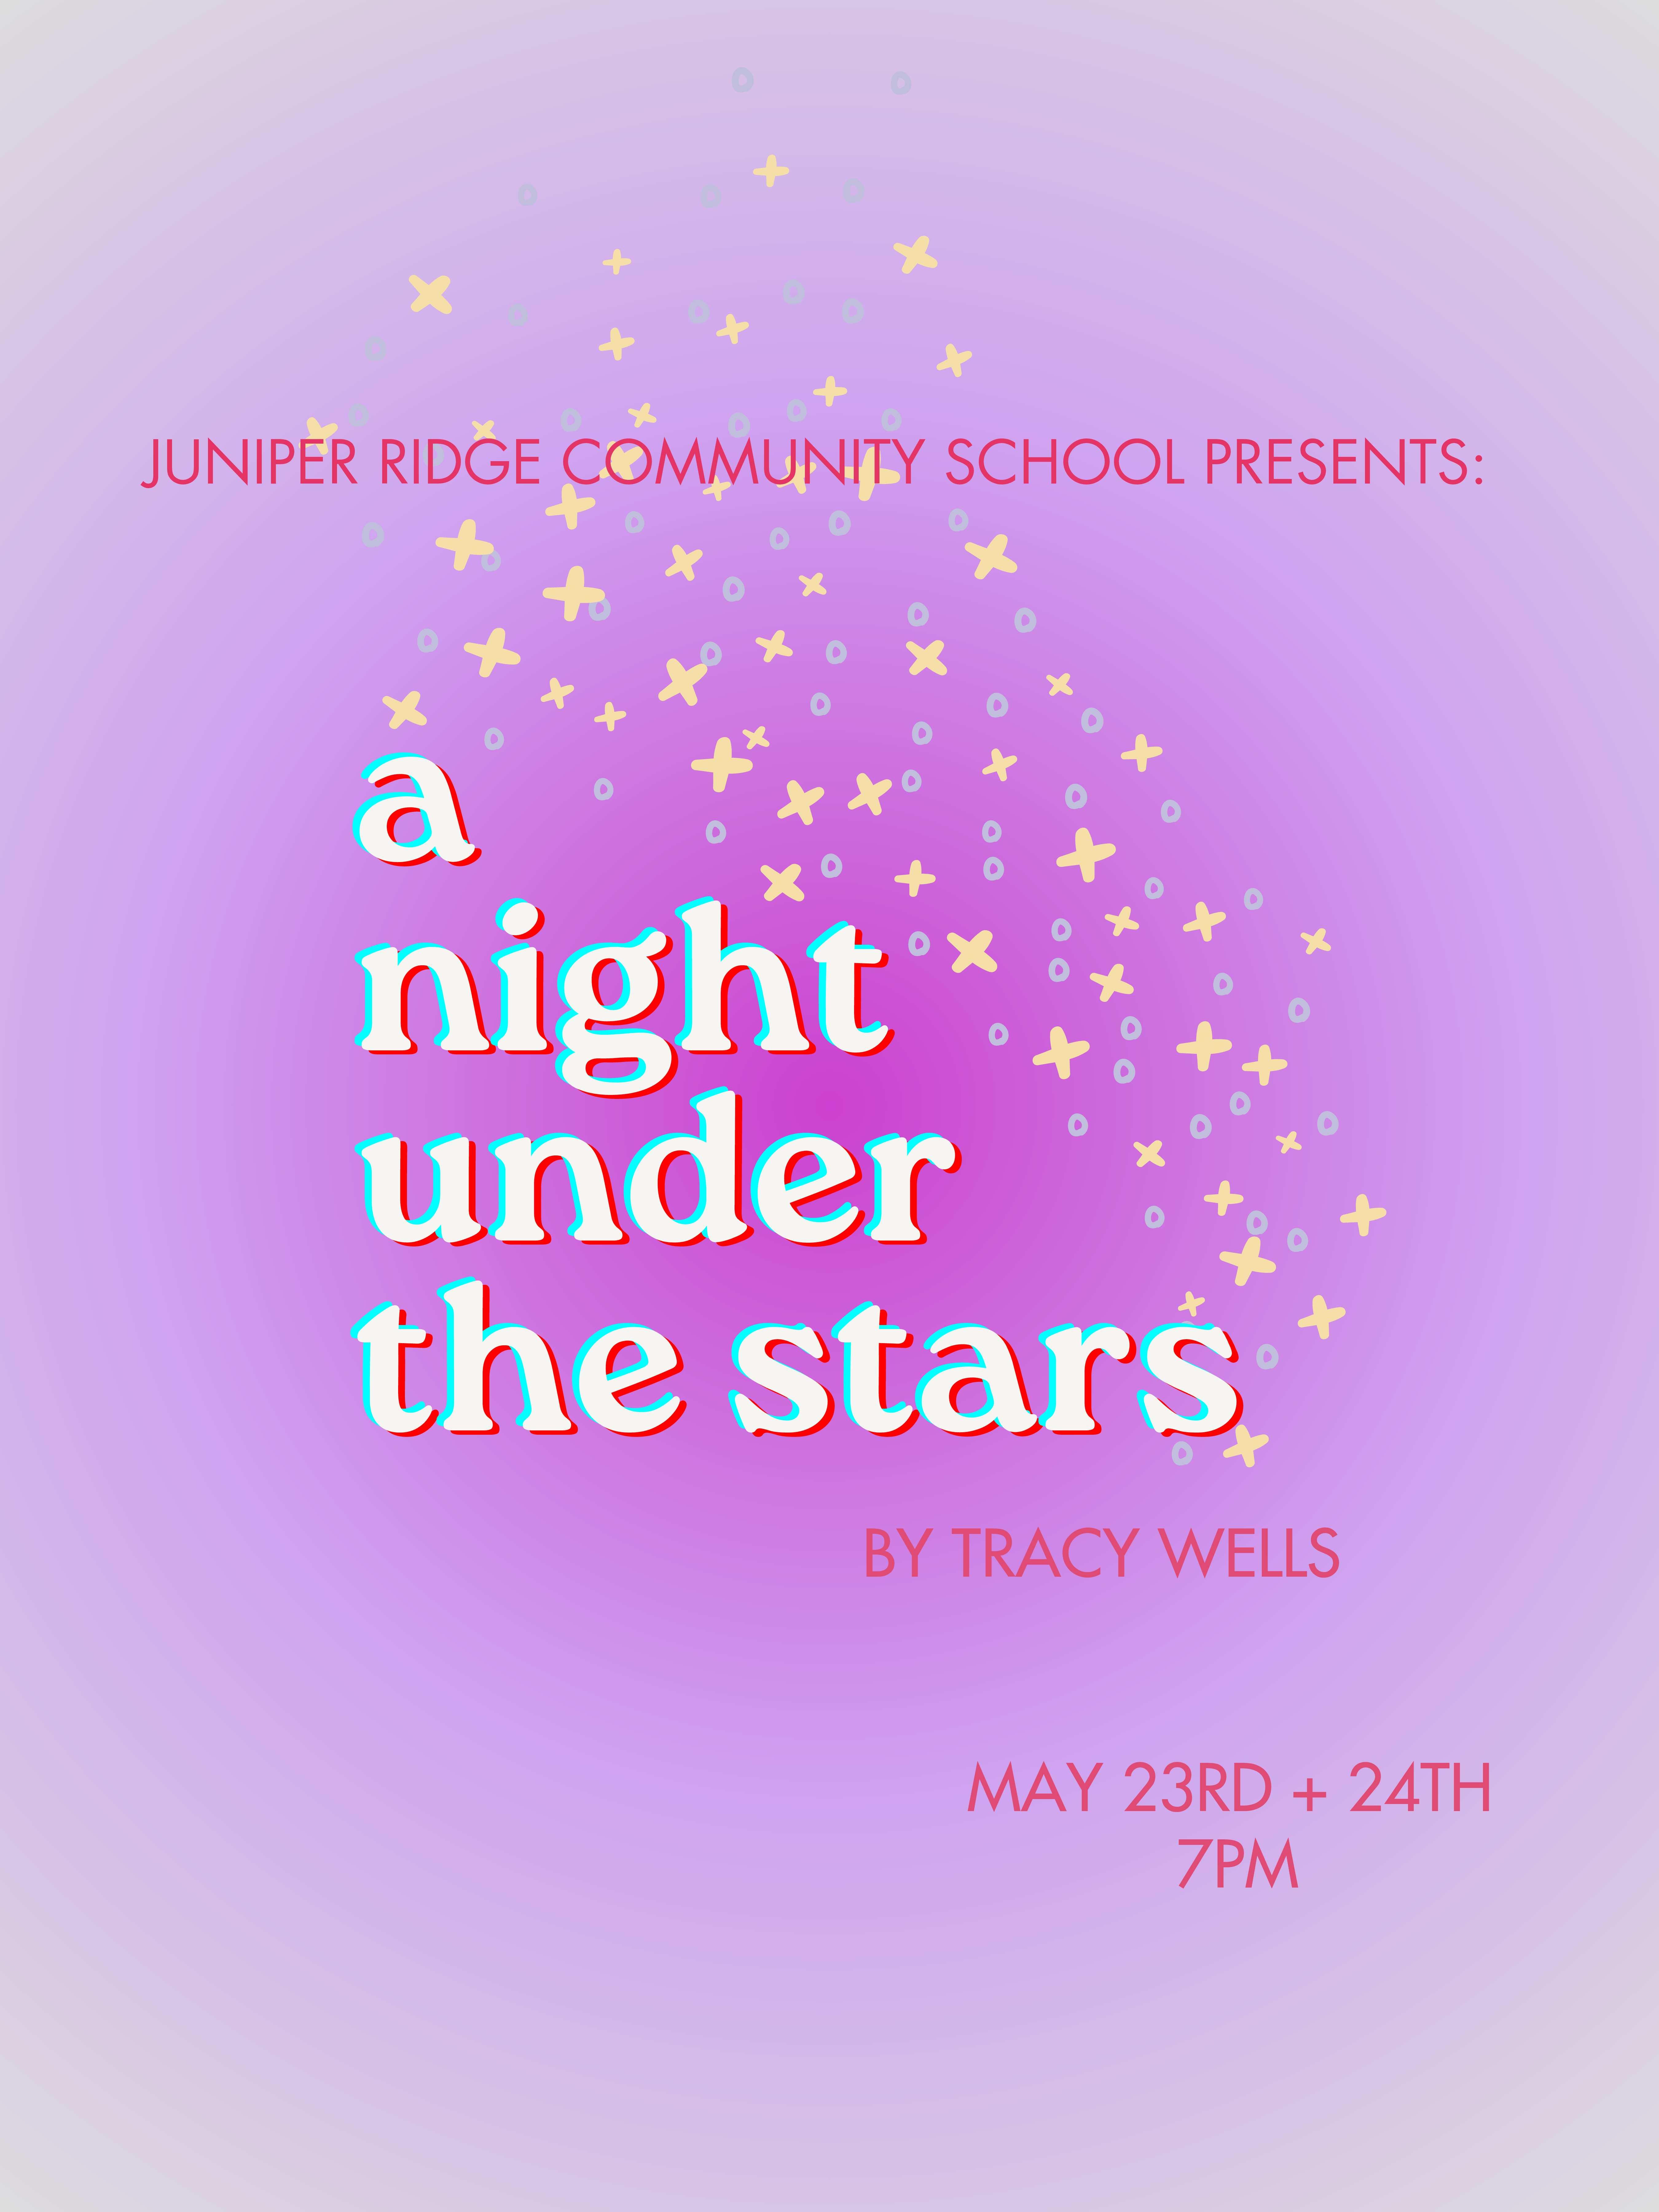 gradient purple background with stars in a shower behind the title